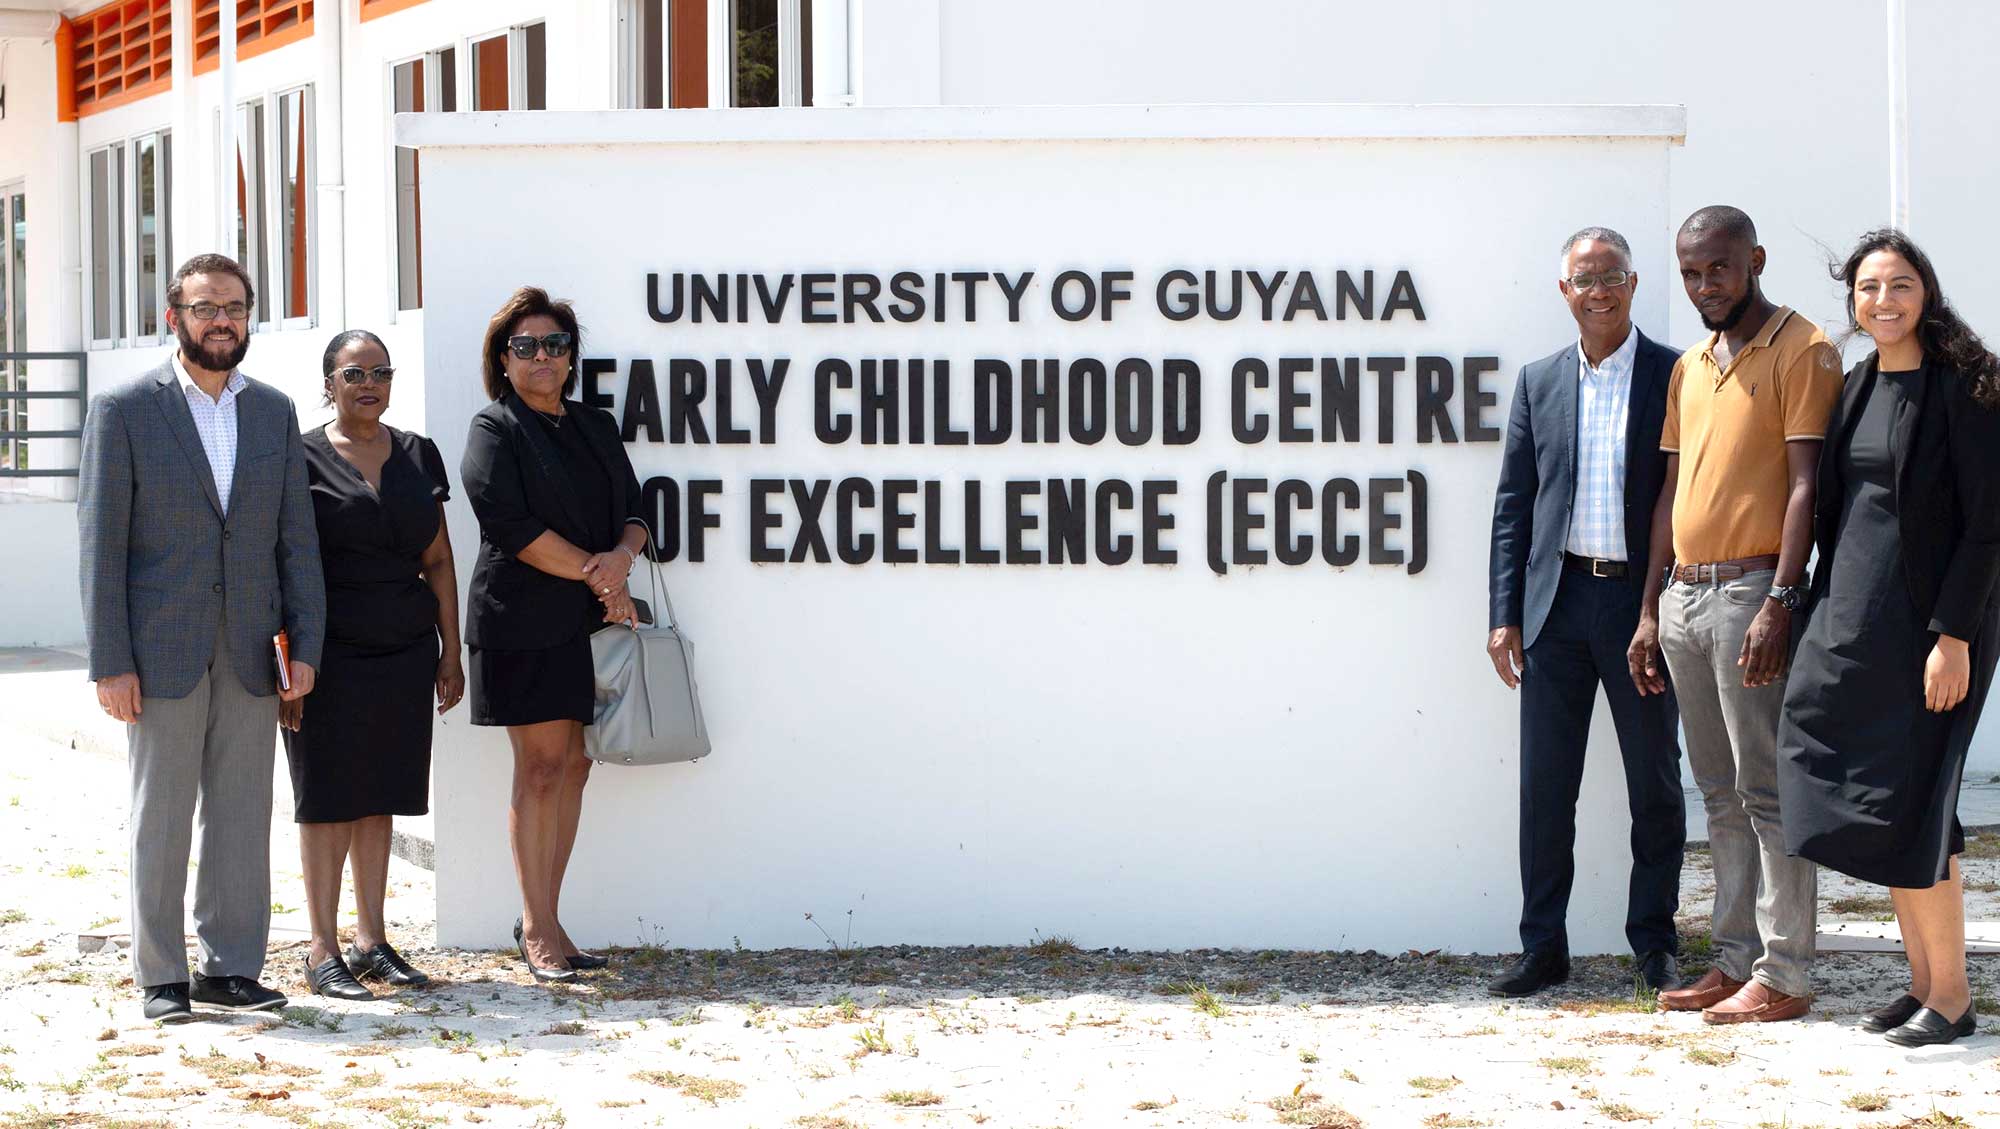 GBC delegation standing in front of University of Guyana Early Childhood Centre of Excellence